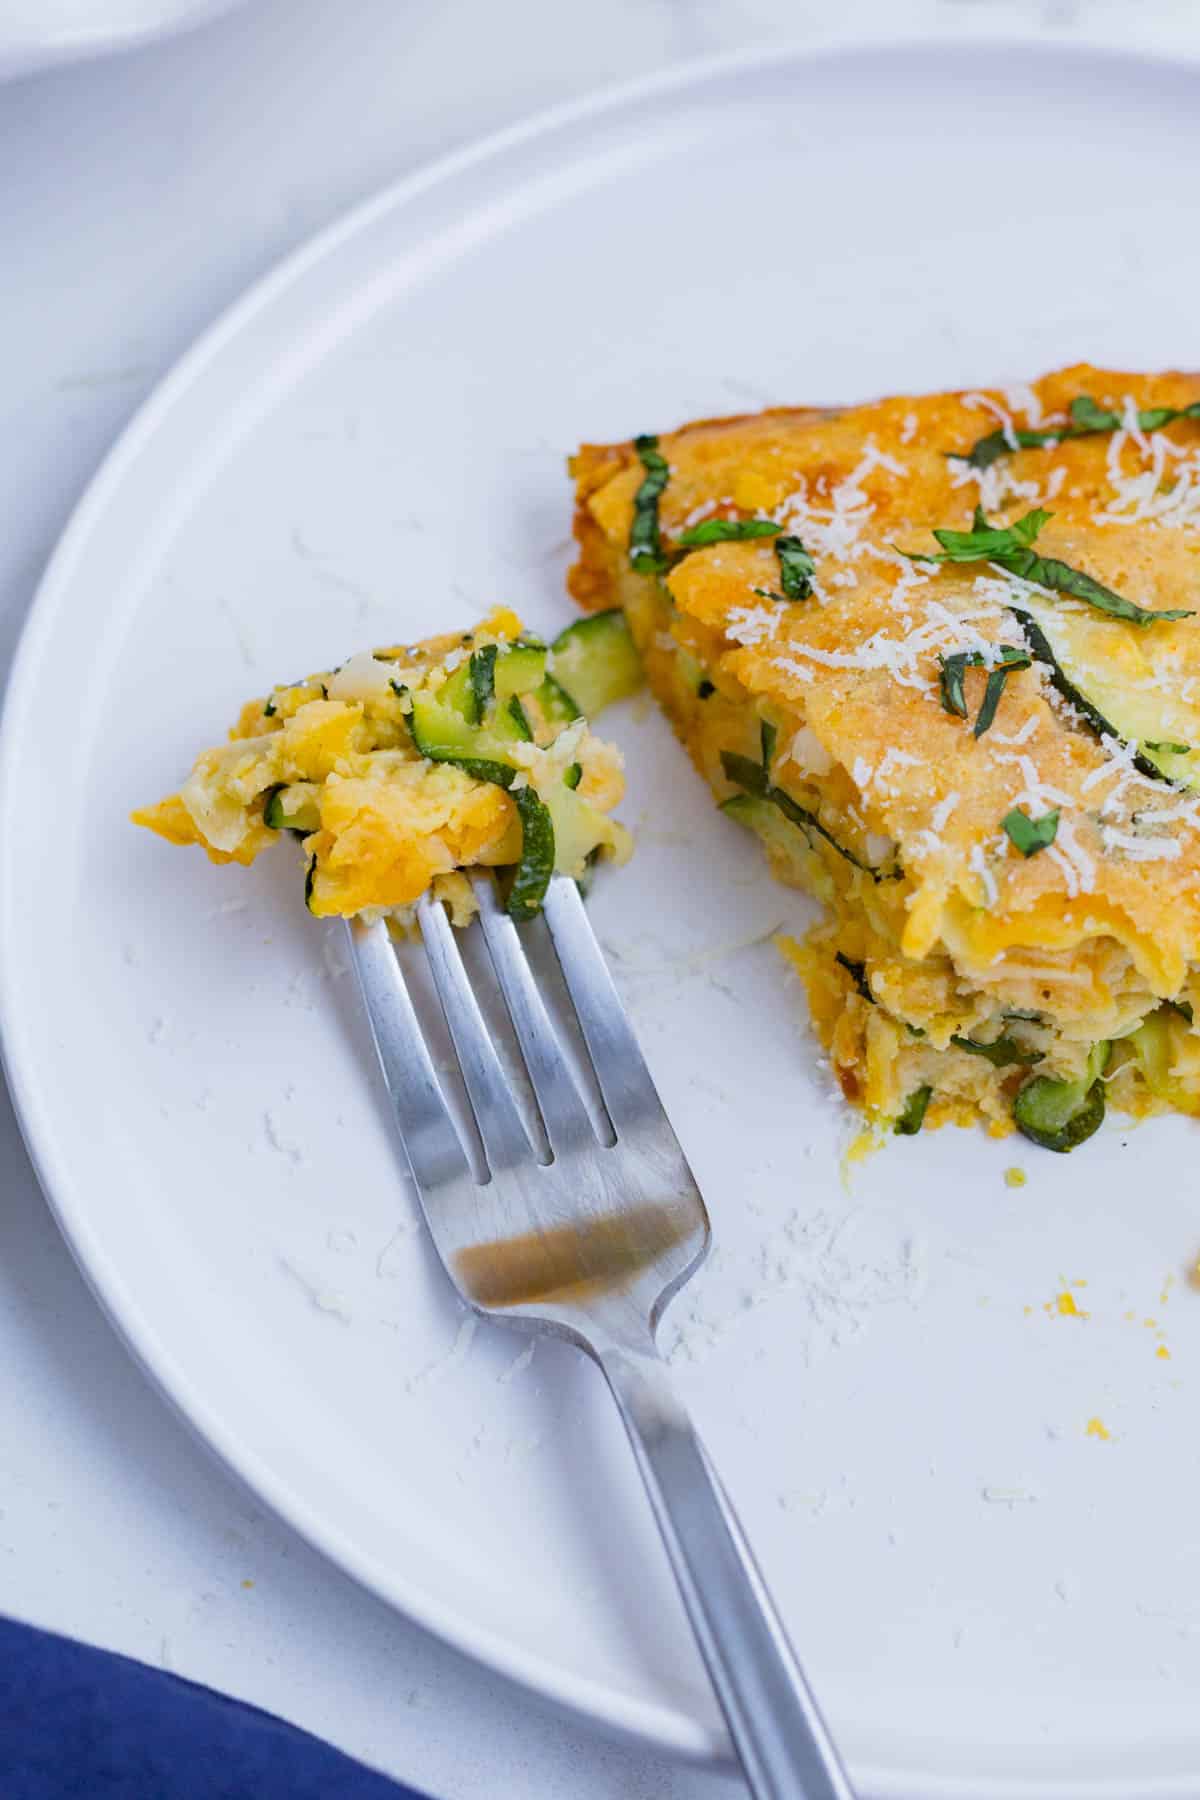 Zucchini pie is a savory and cheesy side dish you can easily whip up at home.